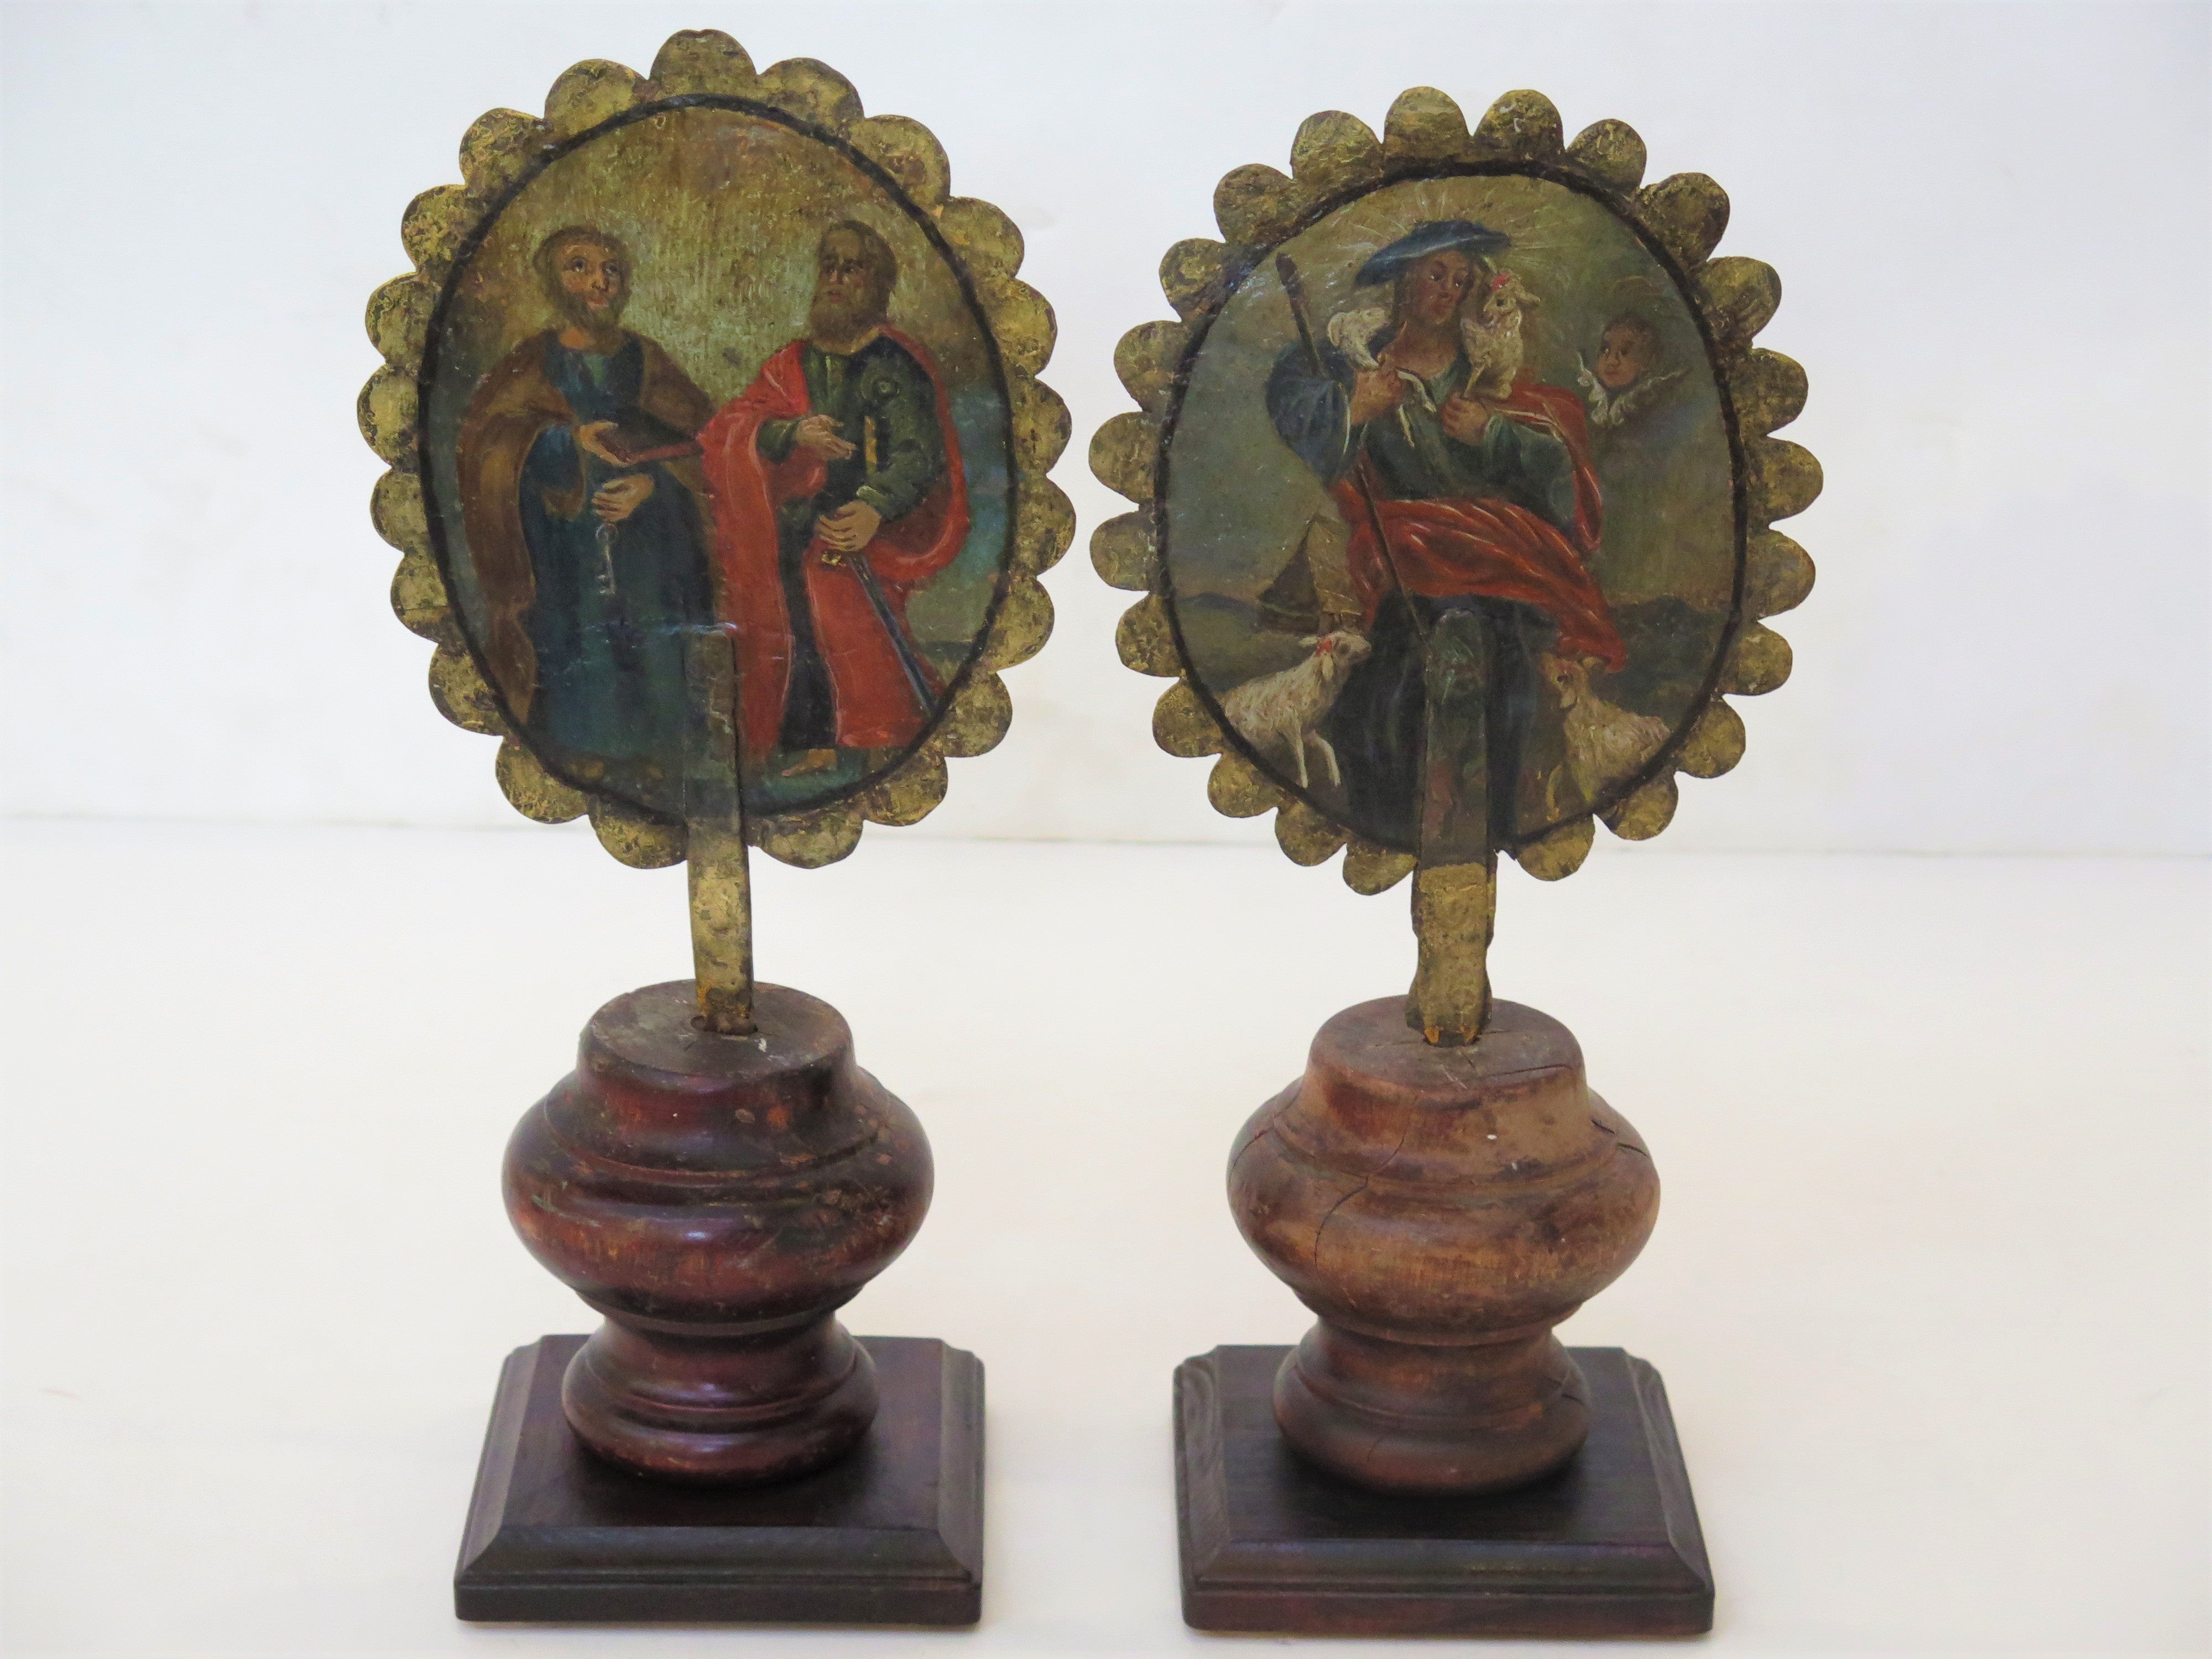 Pair of Religious Plaques of Painted Metal on Wooden Stands Jesus the Good Shepherd and St. Peter and St. Pual